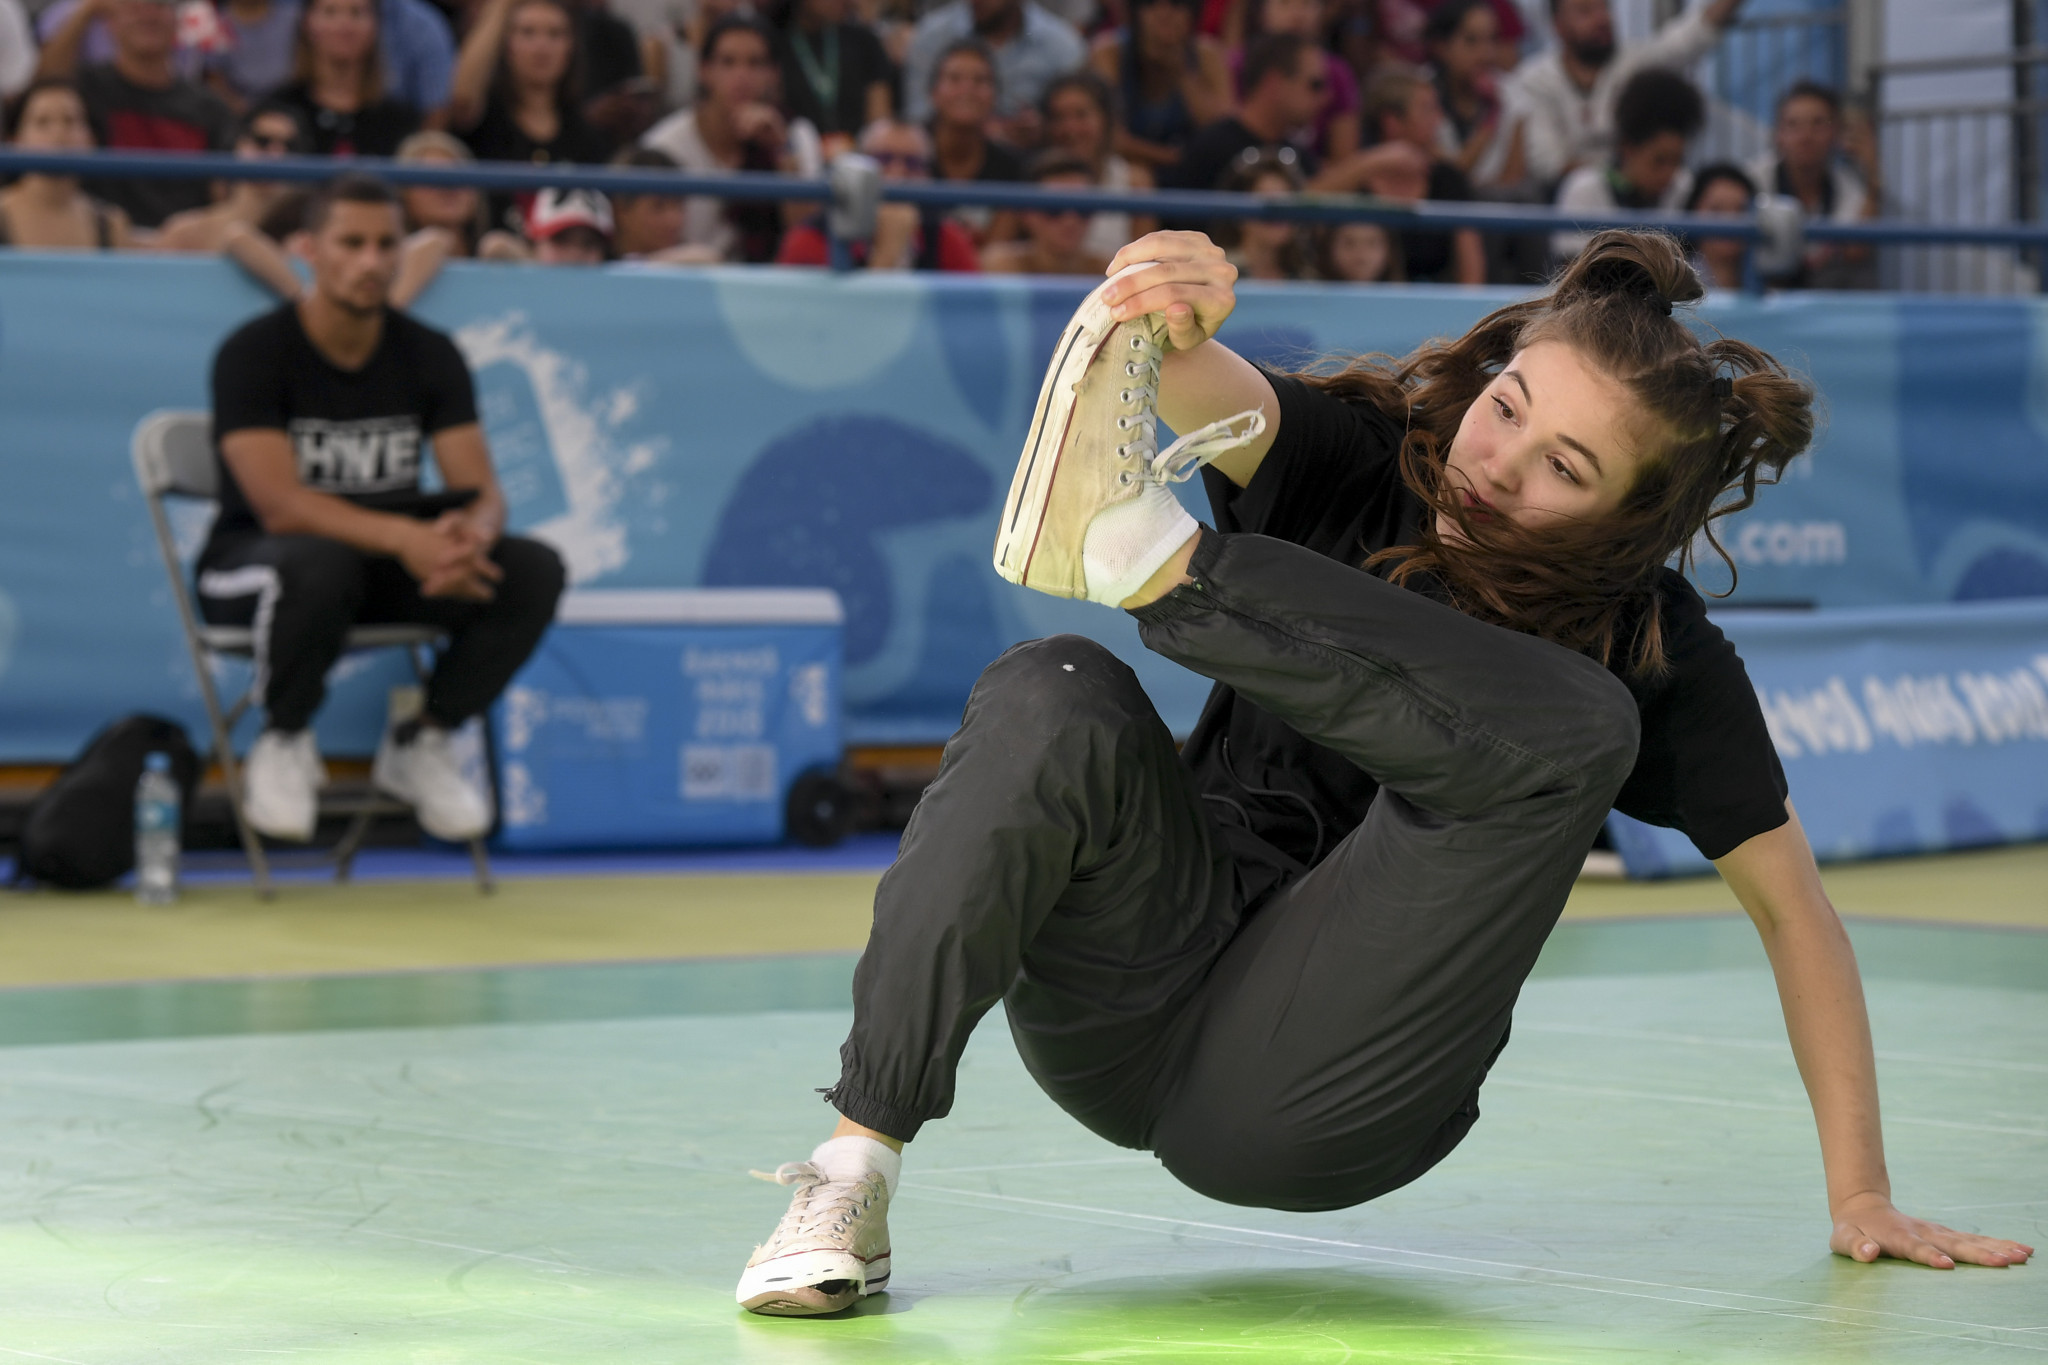 Santiago 2023 venue to hold Chile's National Breaking Championships